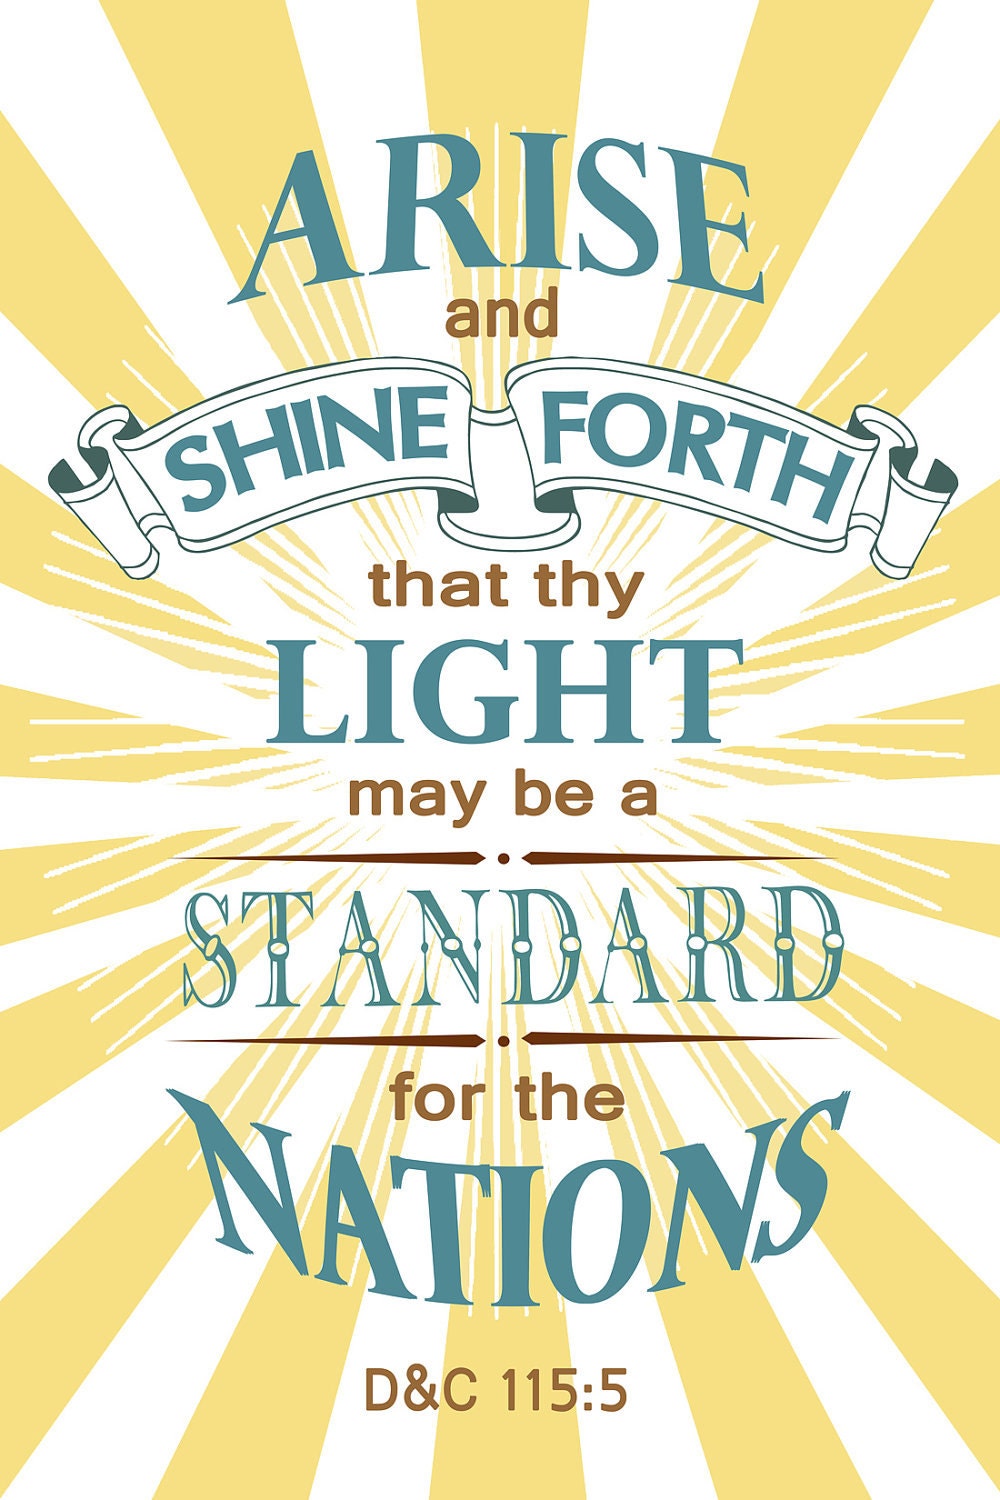 Arise and Shine Forth, 2012 LDS Young Women Scripture Theme Poster, Digital and Printable